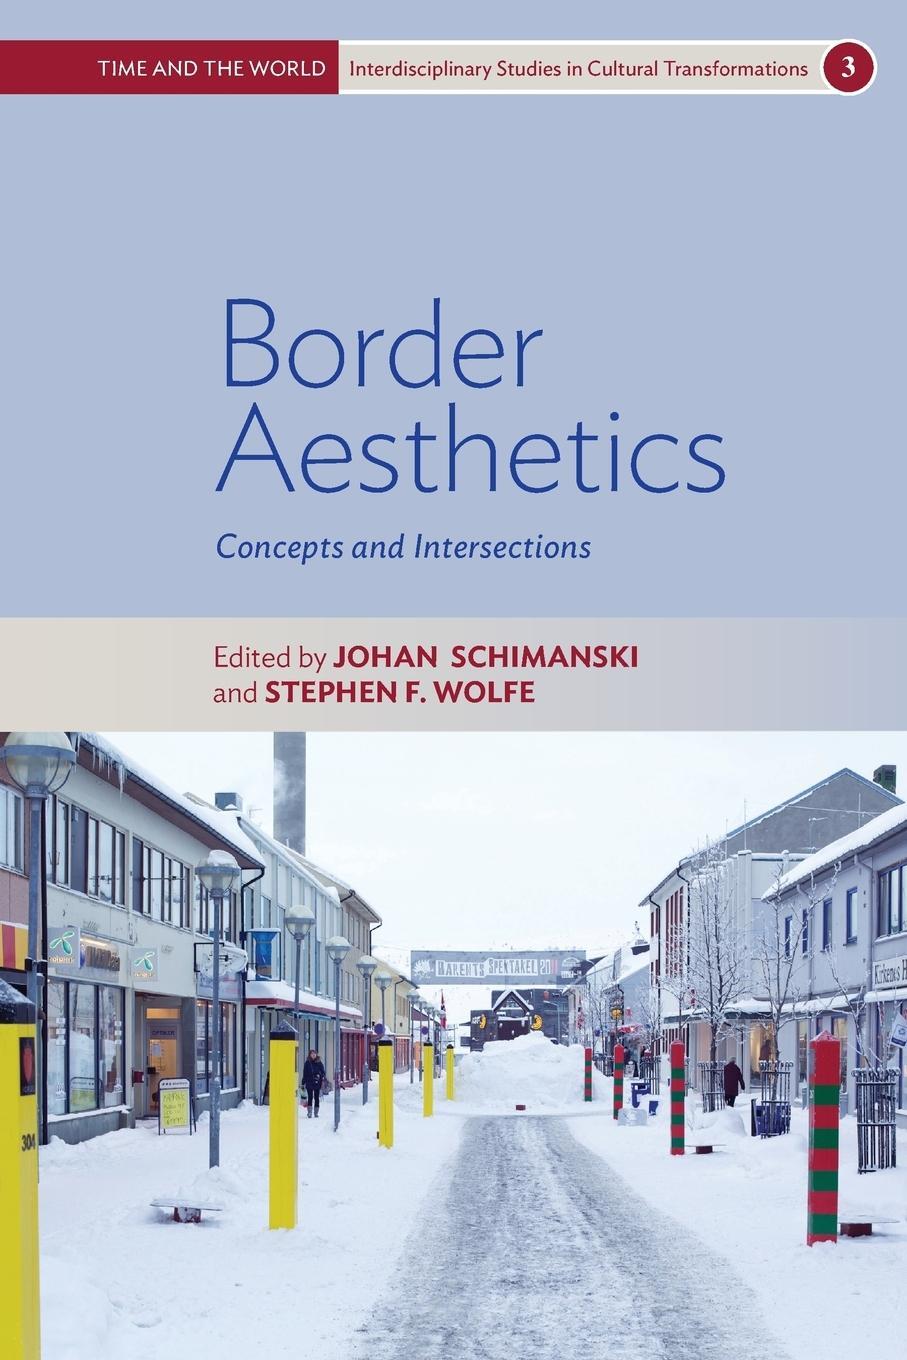 Cover: 9781789200539 | Border Aesthetics | Concepts and Intersections | Stephen F Wolfe